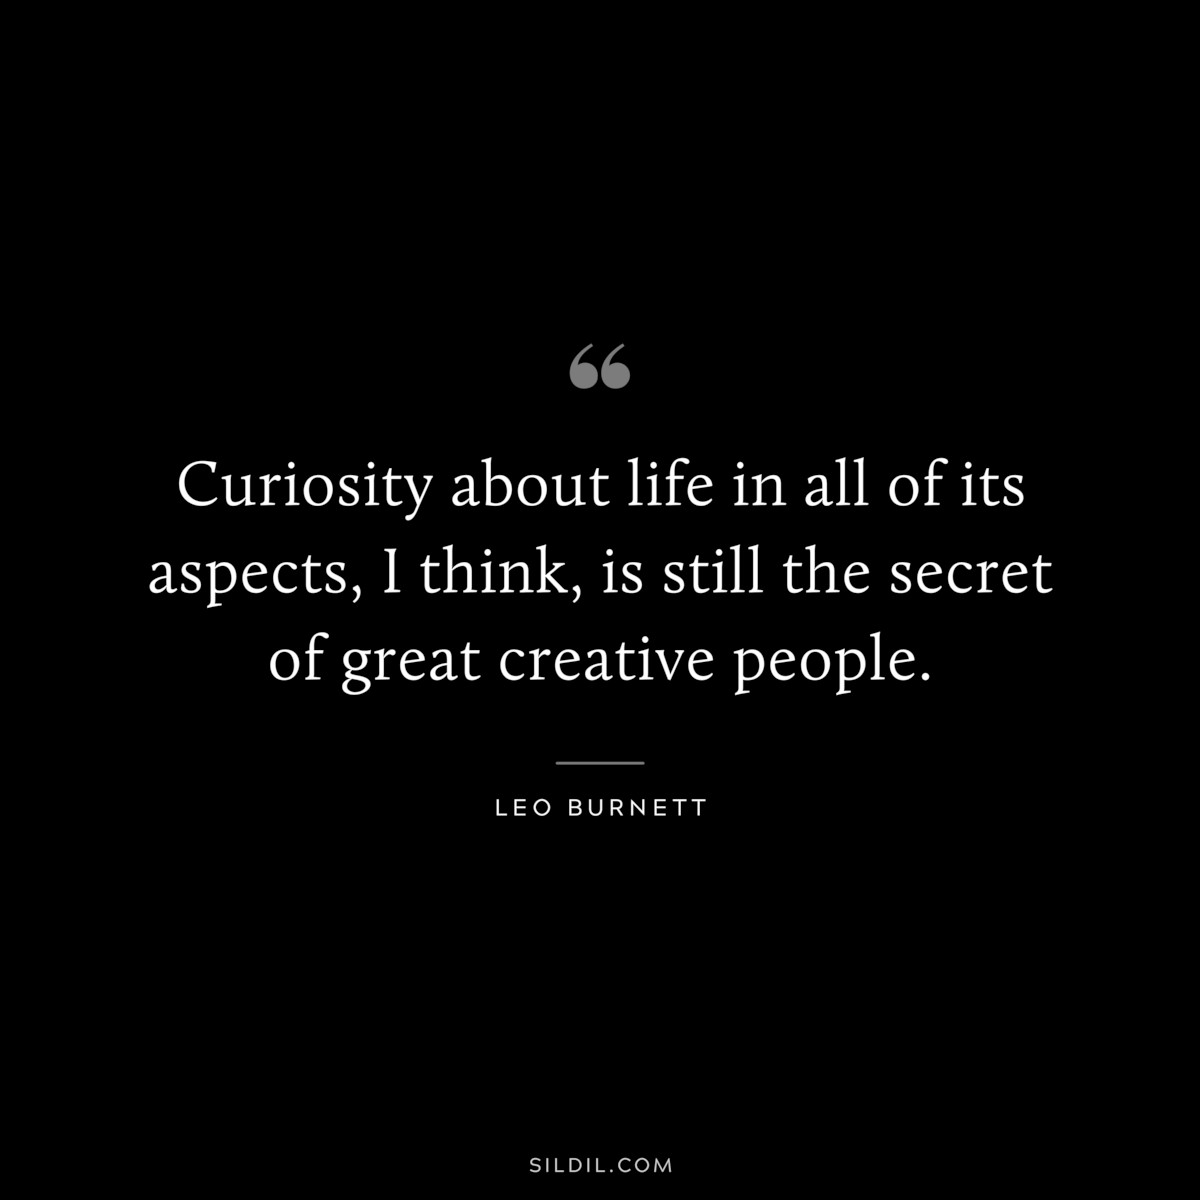 Curiosity about life in all of its aspects, I think, is still the secret of great creative people. ― Leo Burnett